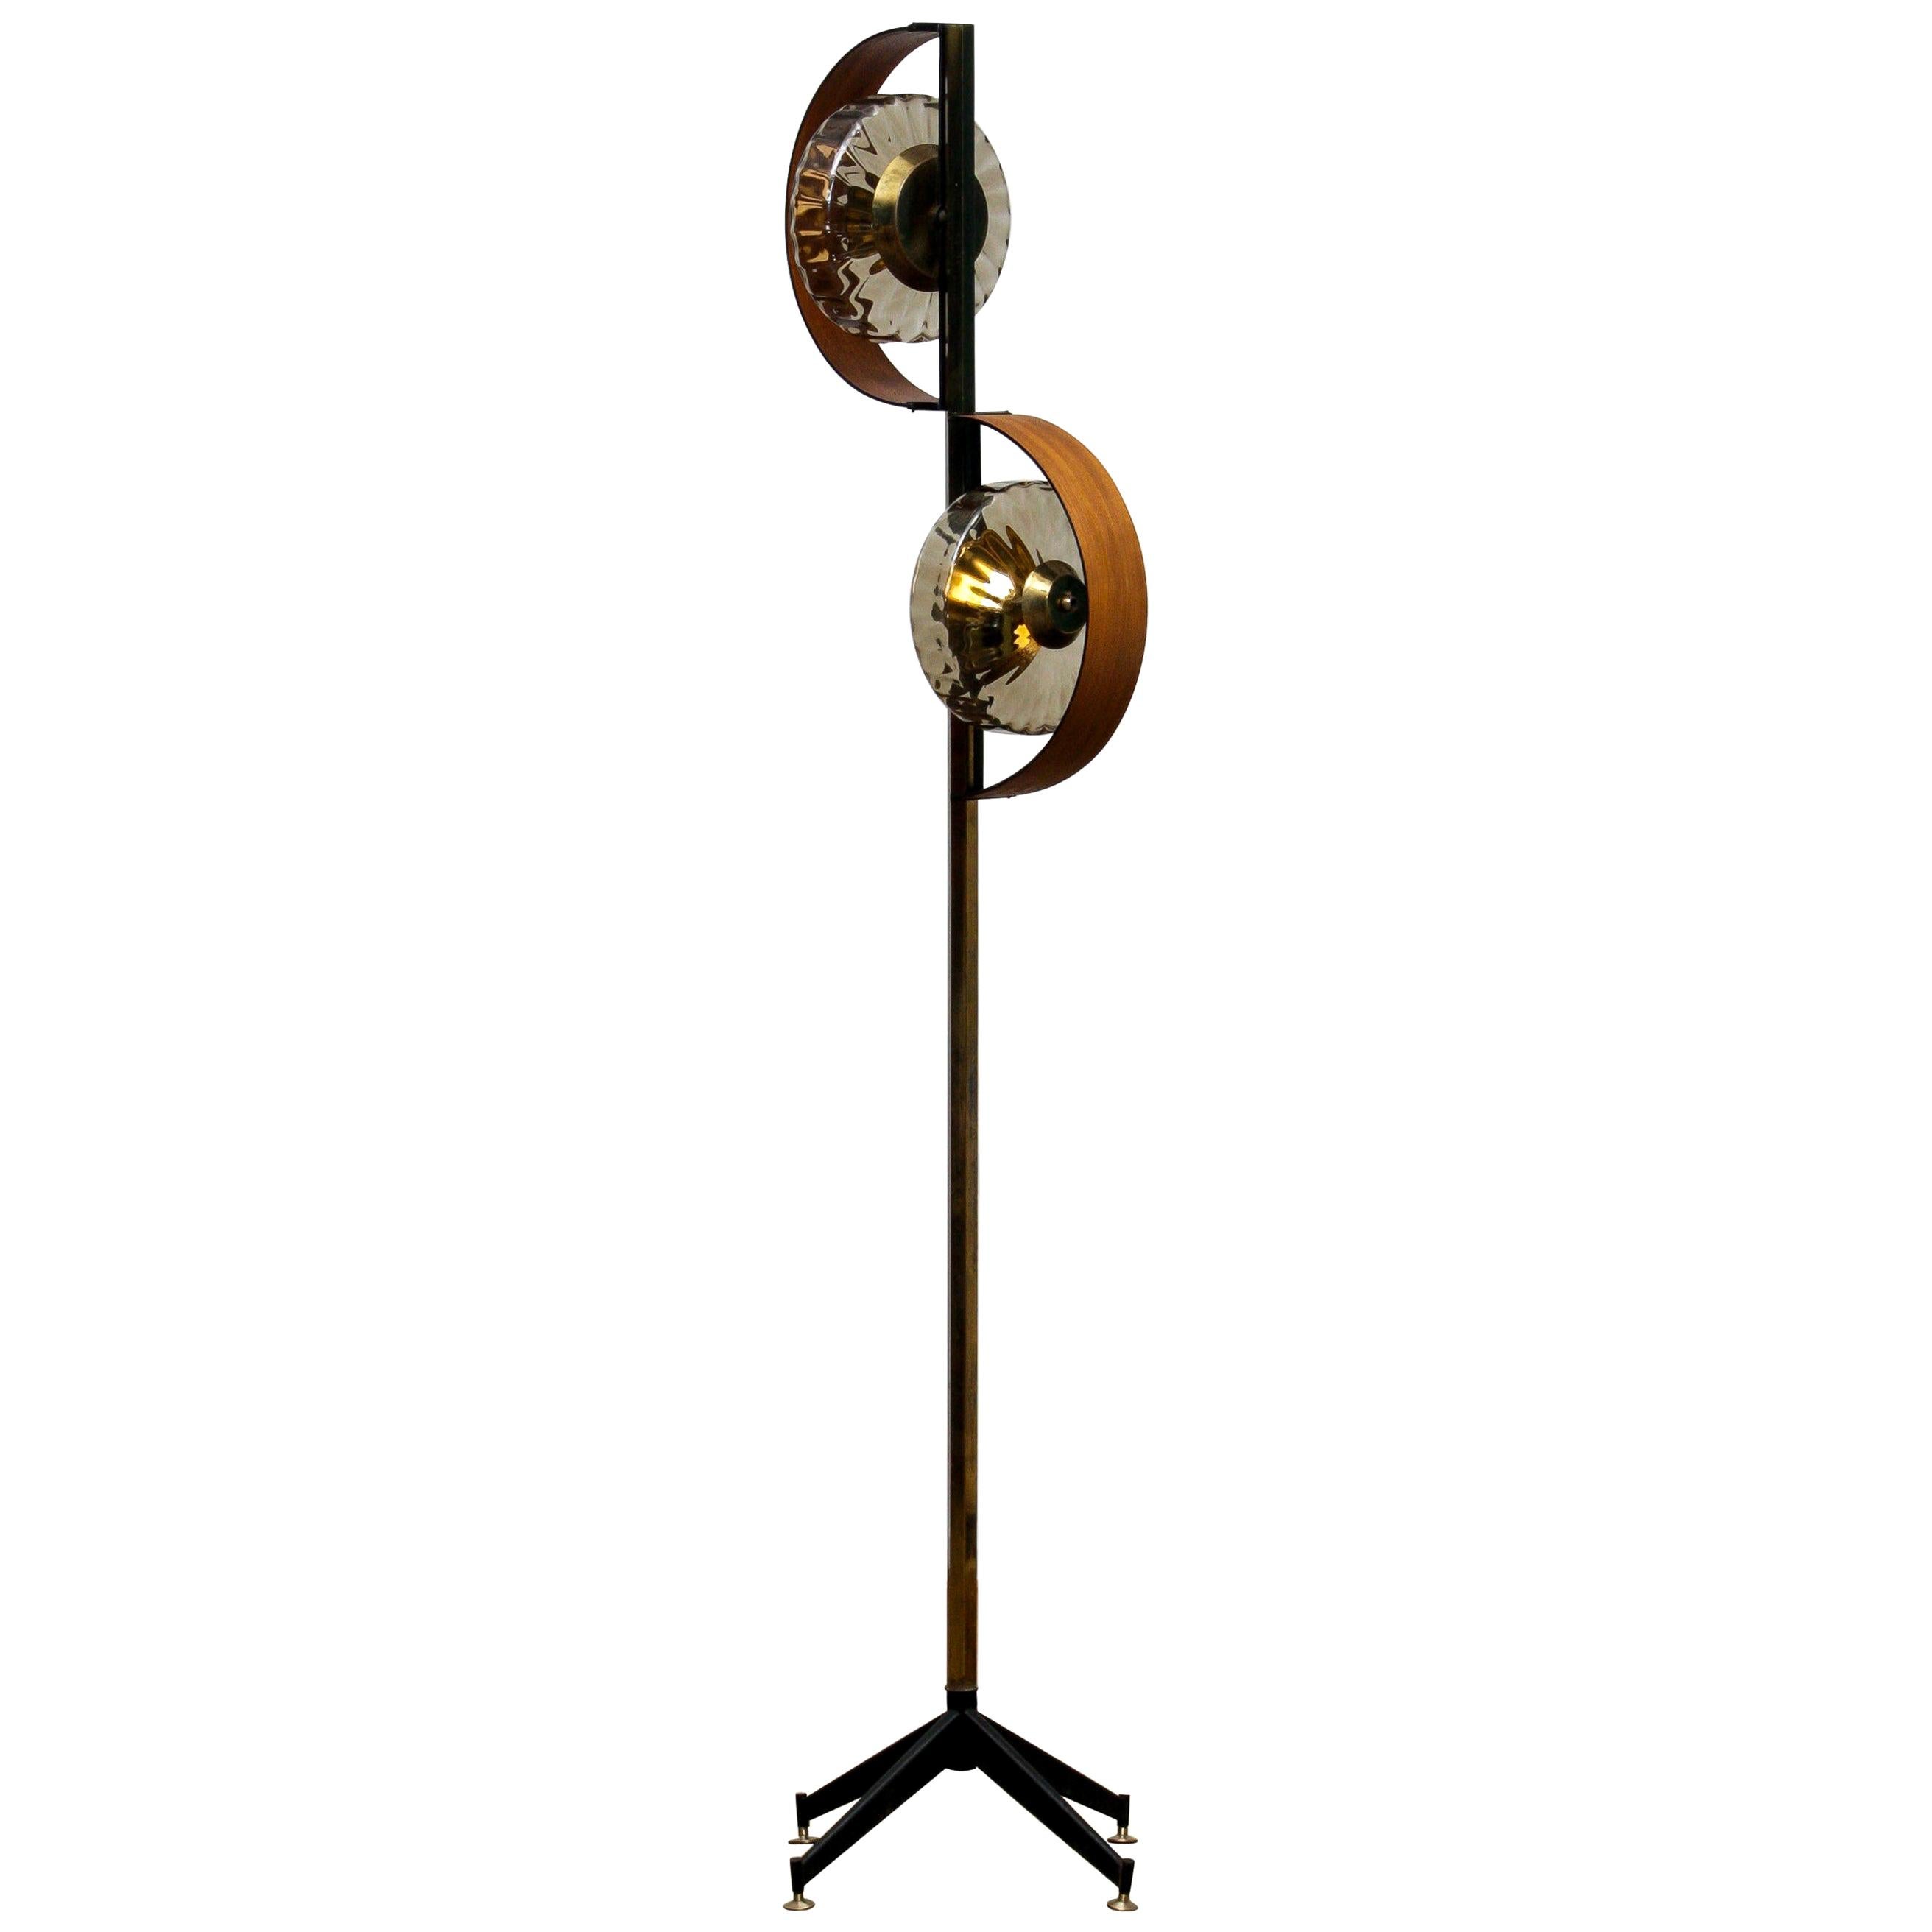 1950s Italian Floor Lamp Made in Brass and Teak with Smoked Glass Shades